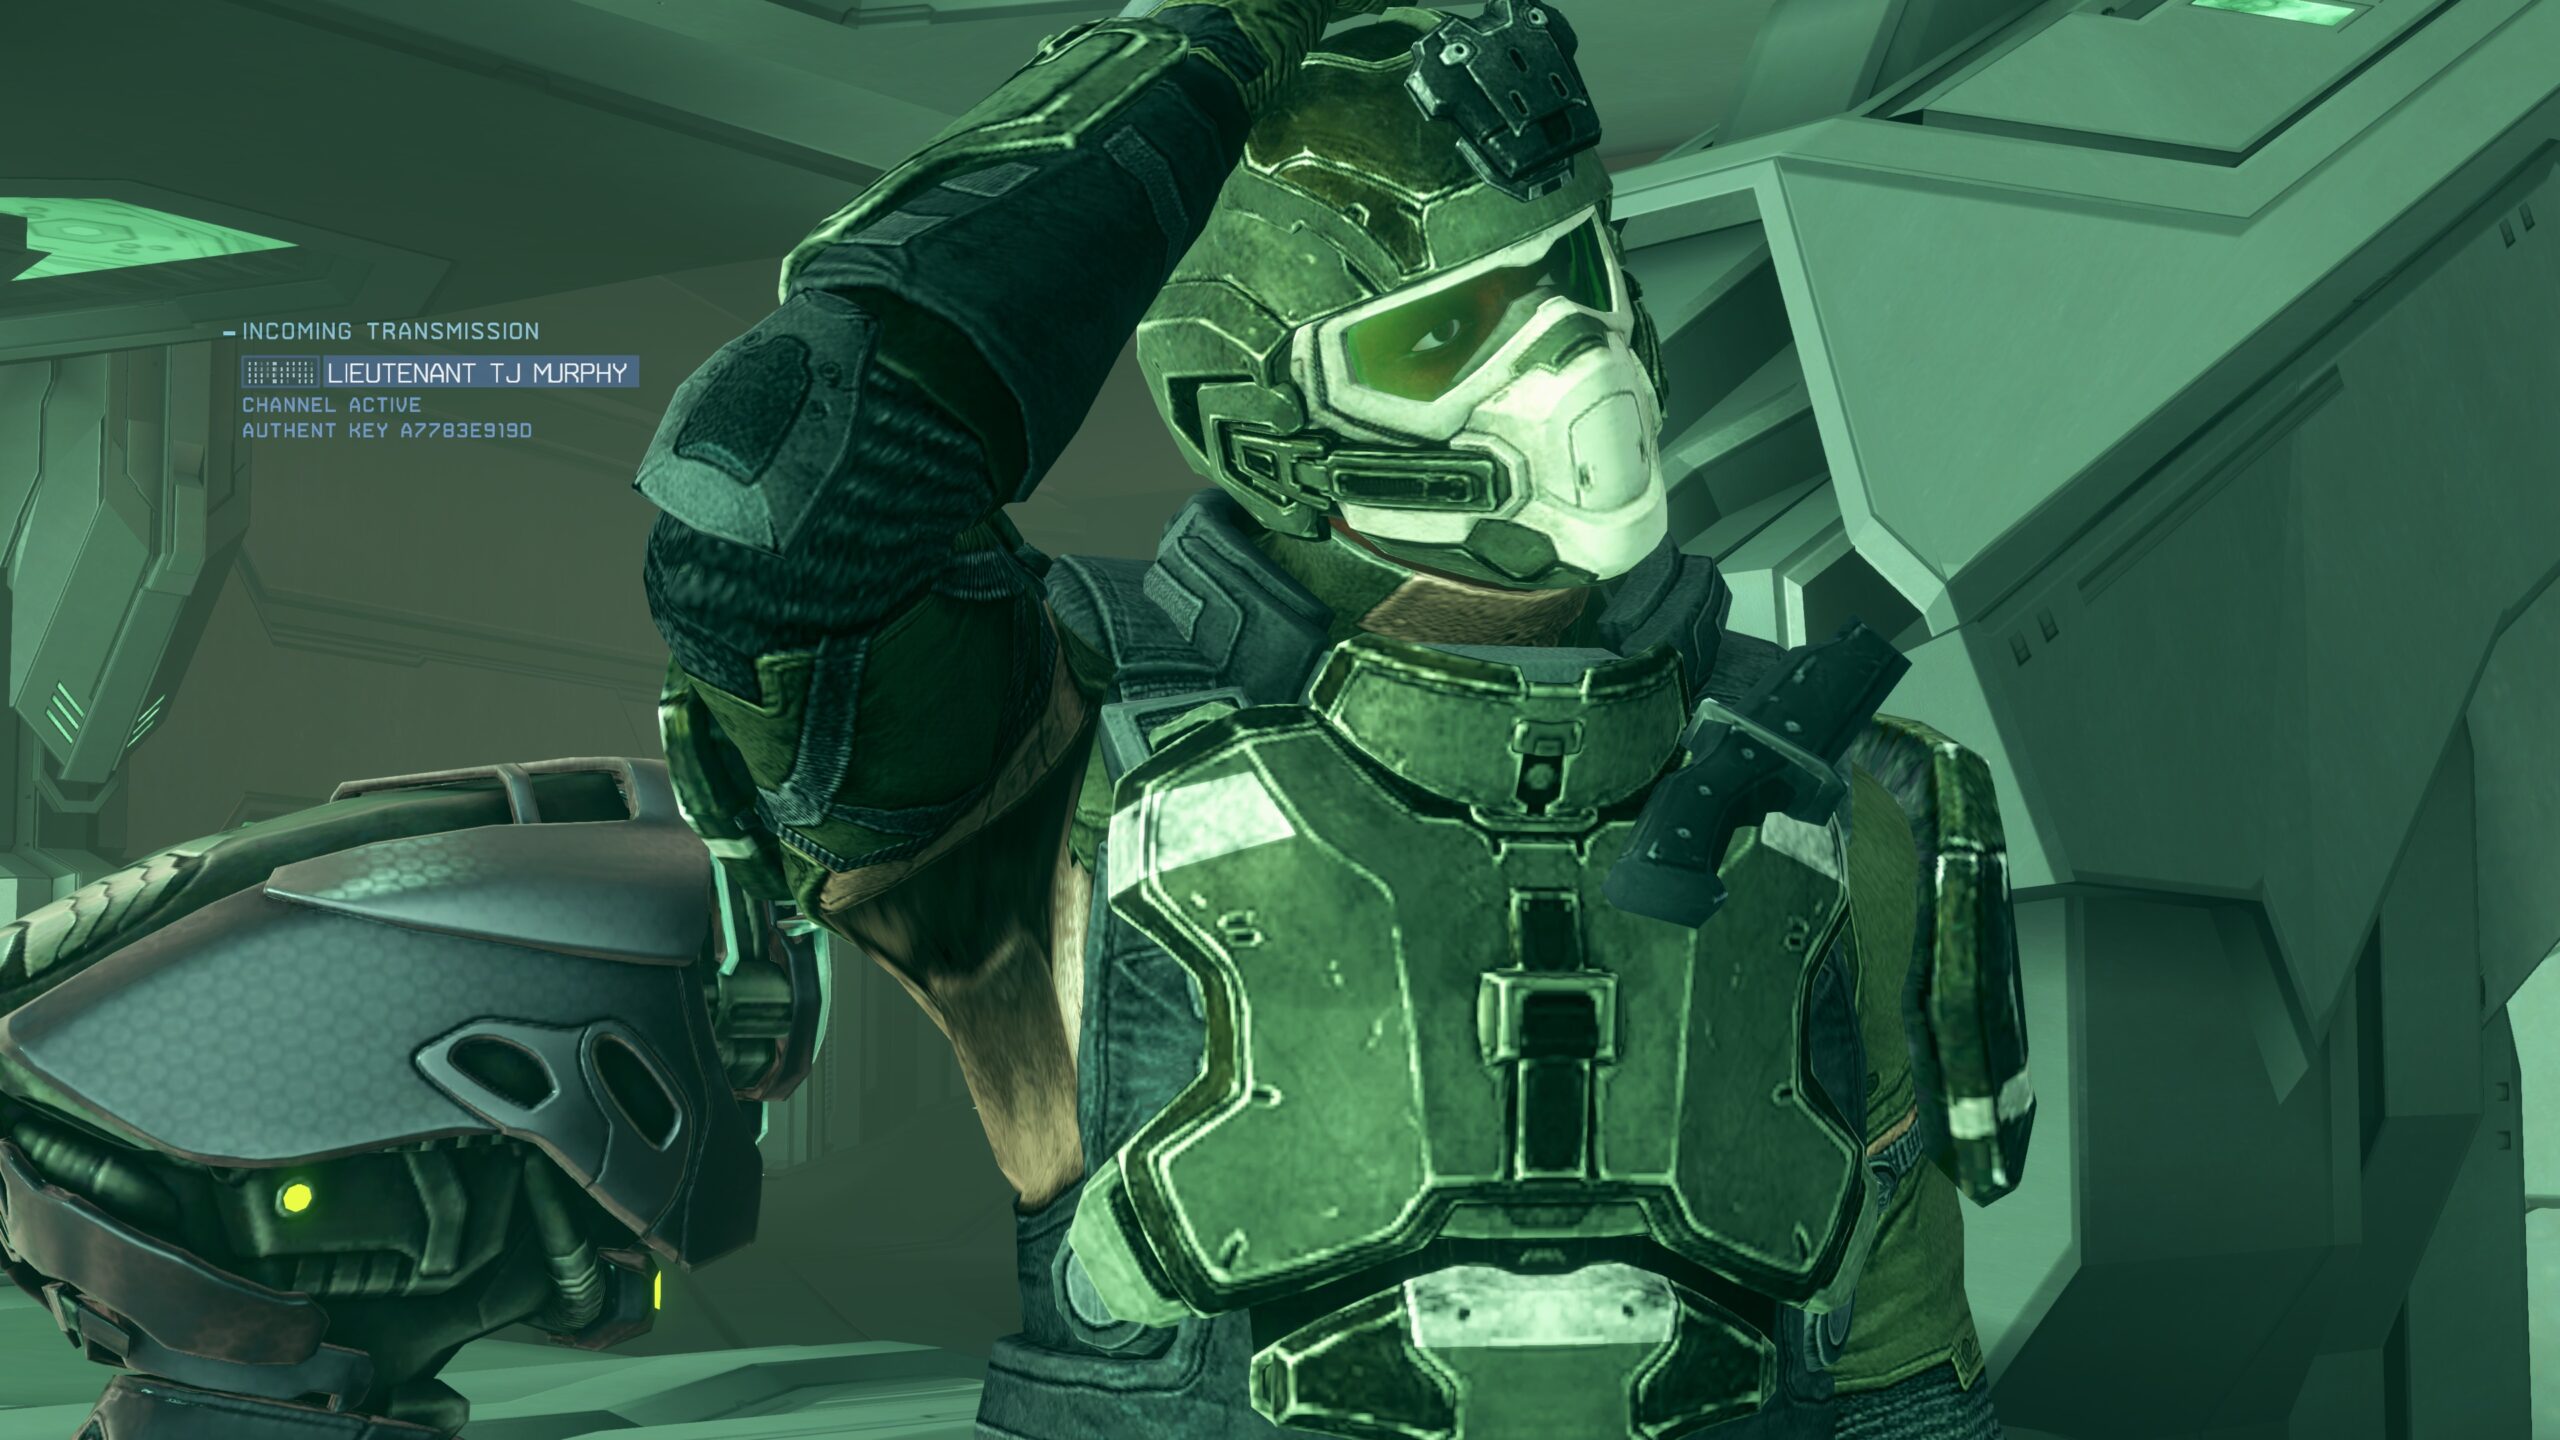 In-game image from Halo 4's Spartan Ops of TJ Murphy